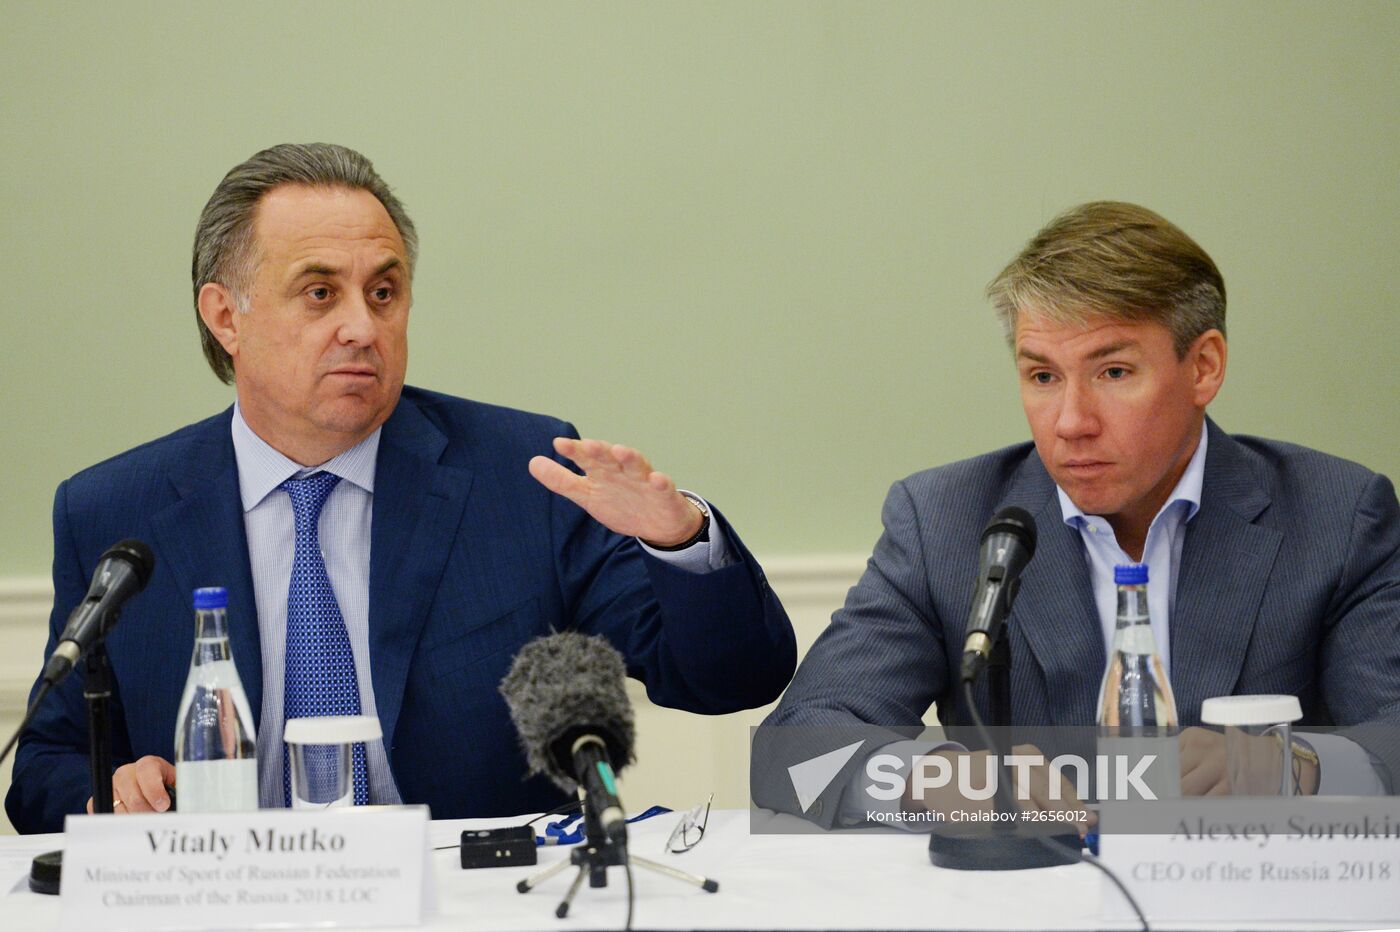 Press briefing by Vitaly Mutko and Alexei Sorokin in Moscow